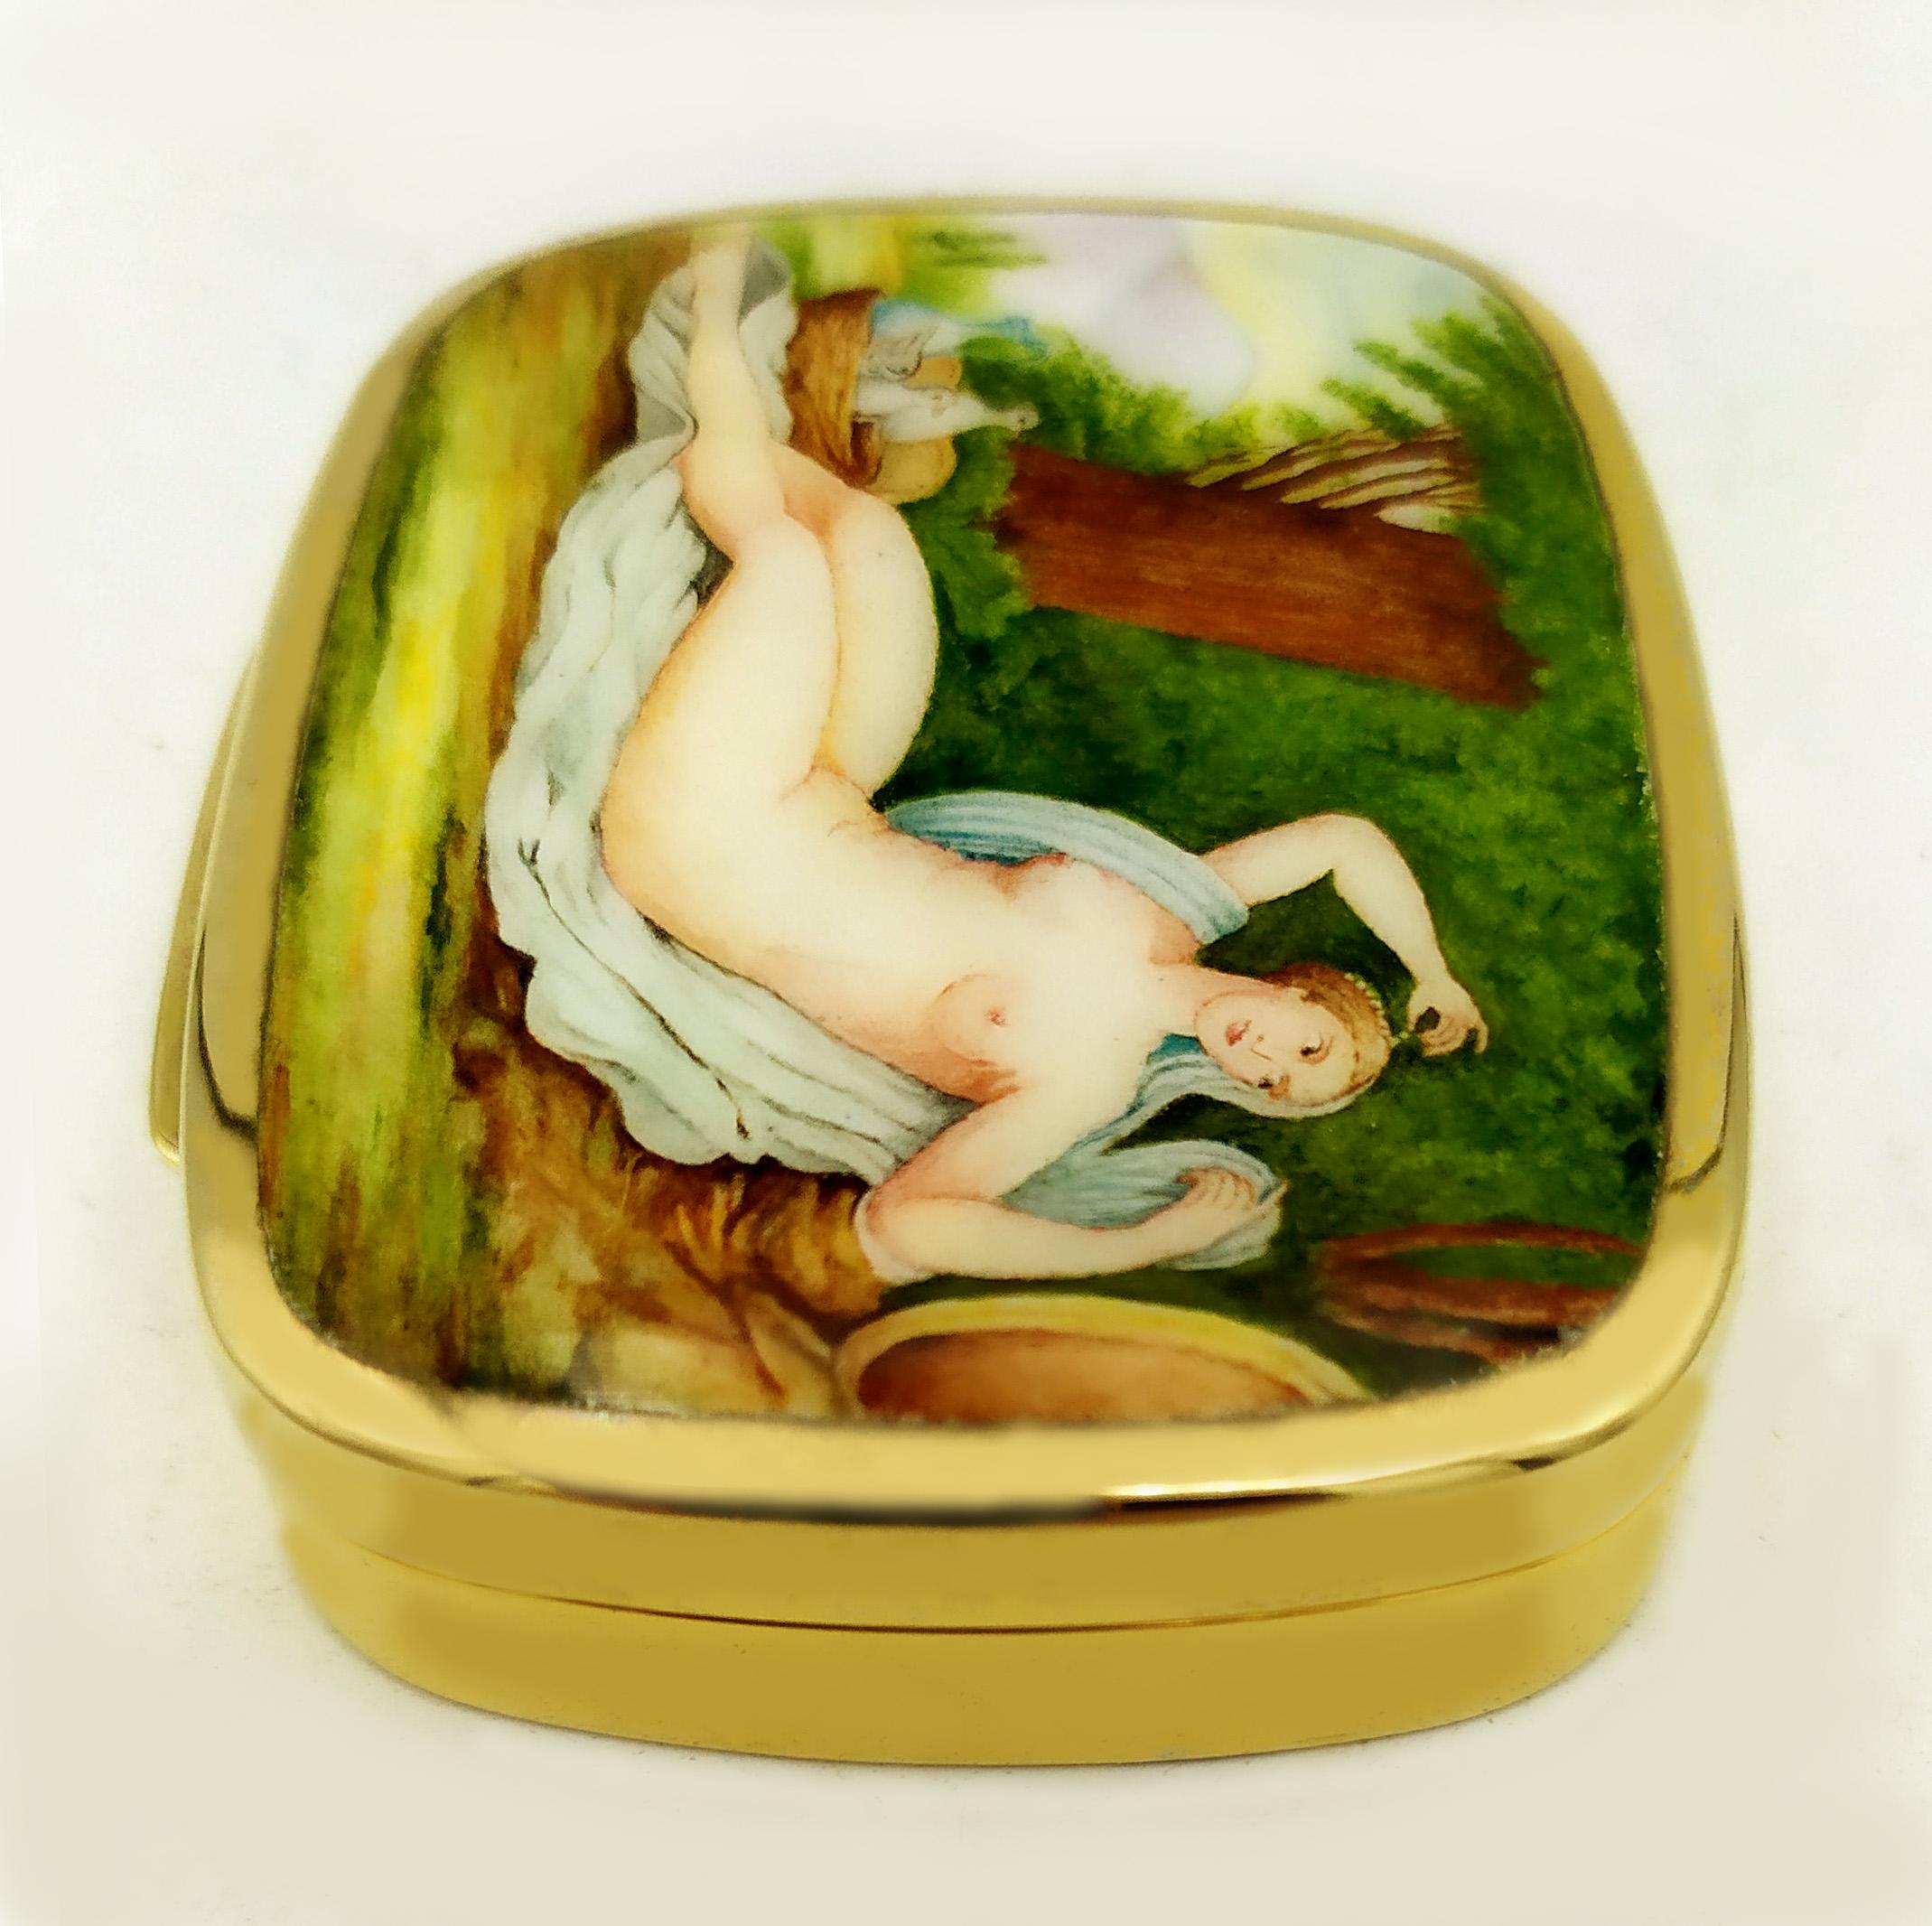 Rounded rectangular snuffbox in 925/1000 sterling silver gold plated with hand-painted fire-enamelled miniature on the lid. Early 1900s English Art Nouveau style. Measurements cm. 5.7 x 7.2 x 2. Weight gr. 142. Designed by Giorgio Salimbeni in 1967